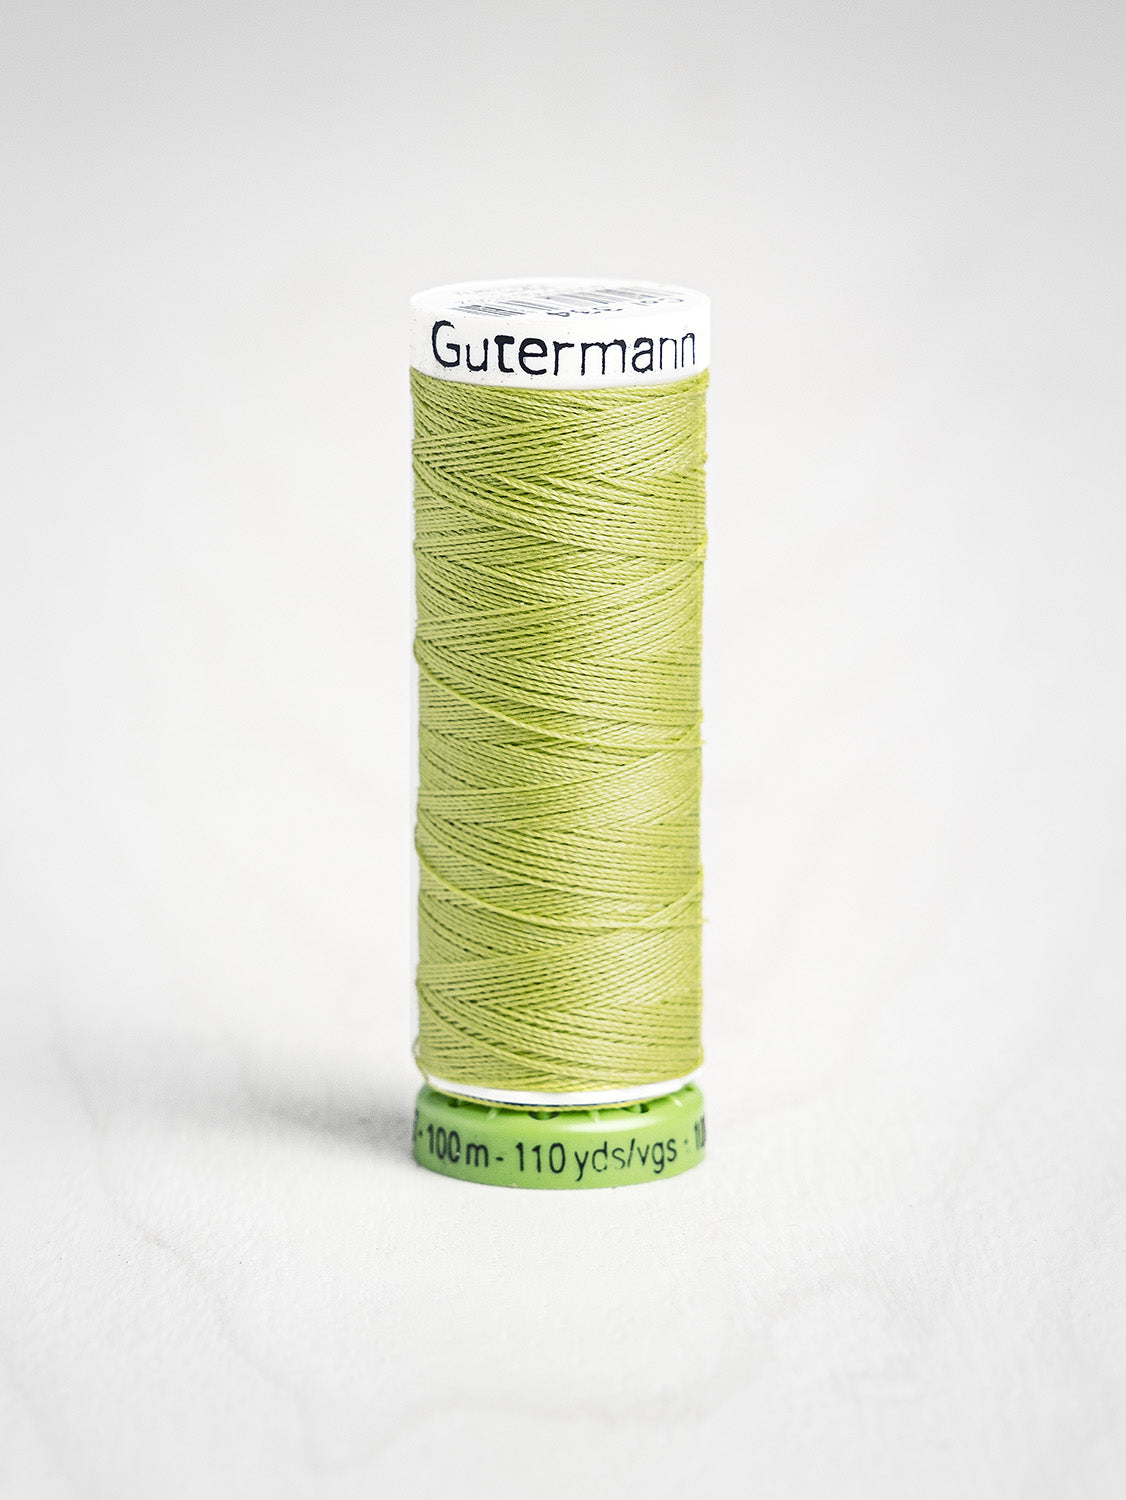 Gütermann All Purpose rPET Recycled Thread - Light Lime Green 334 | Core Fabrics